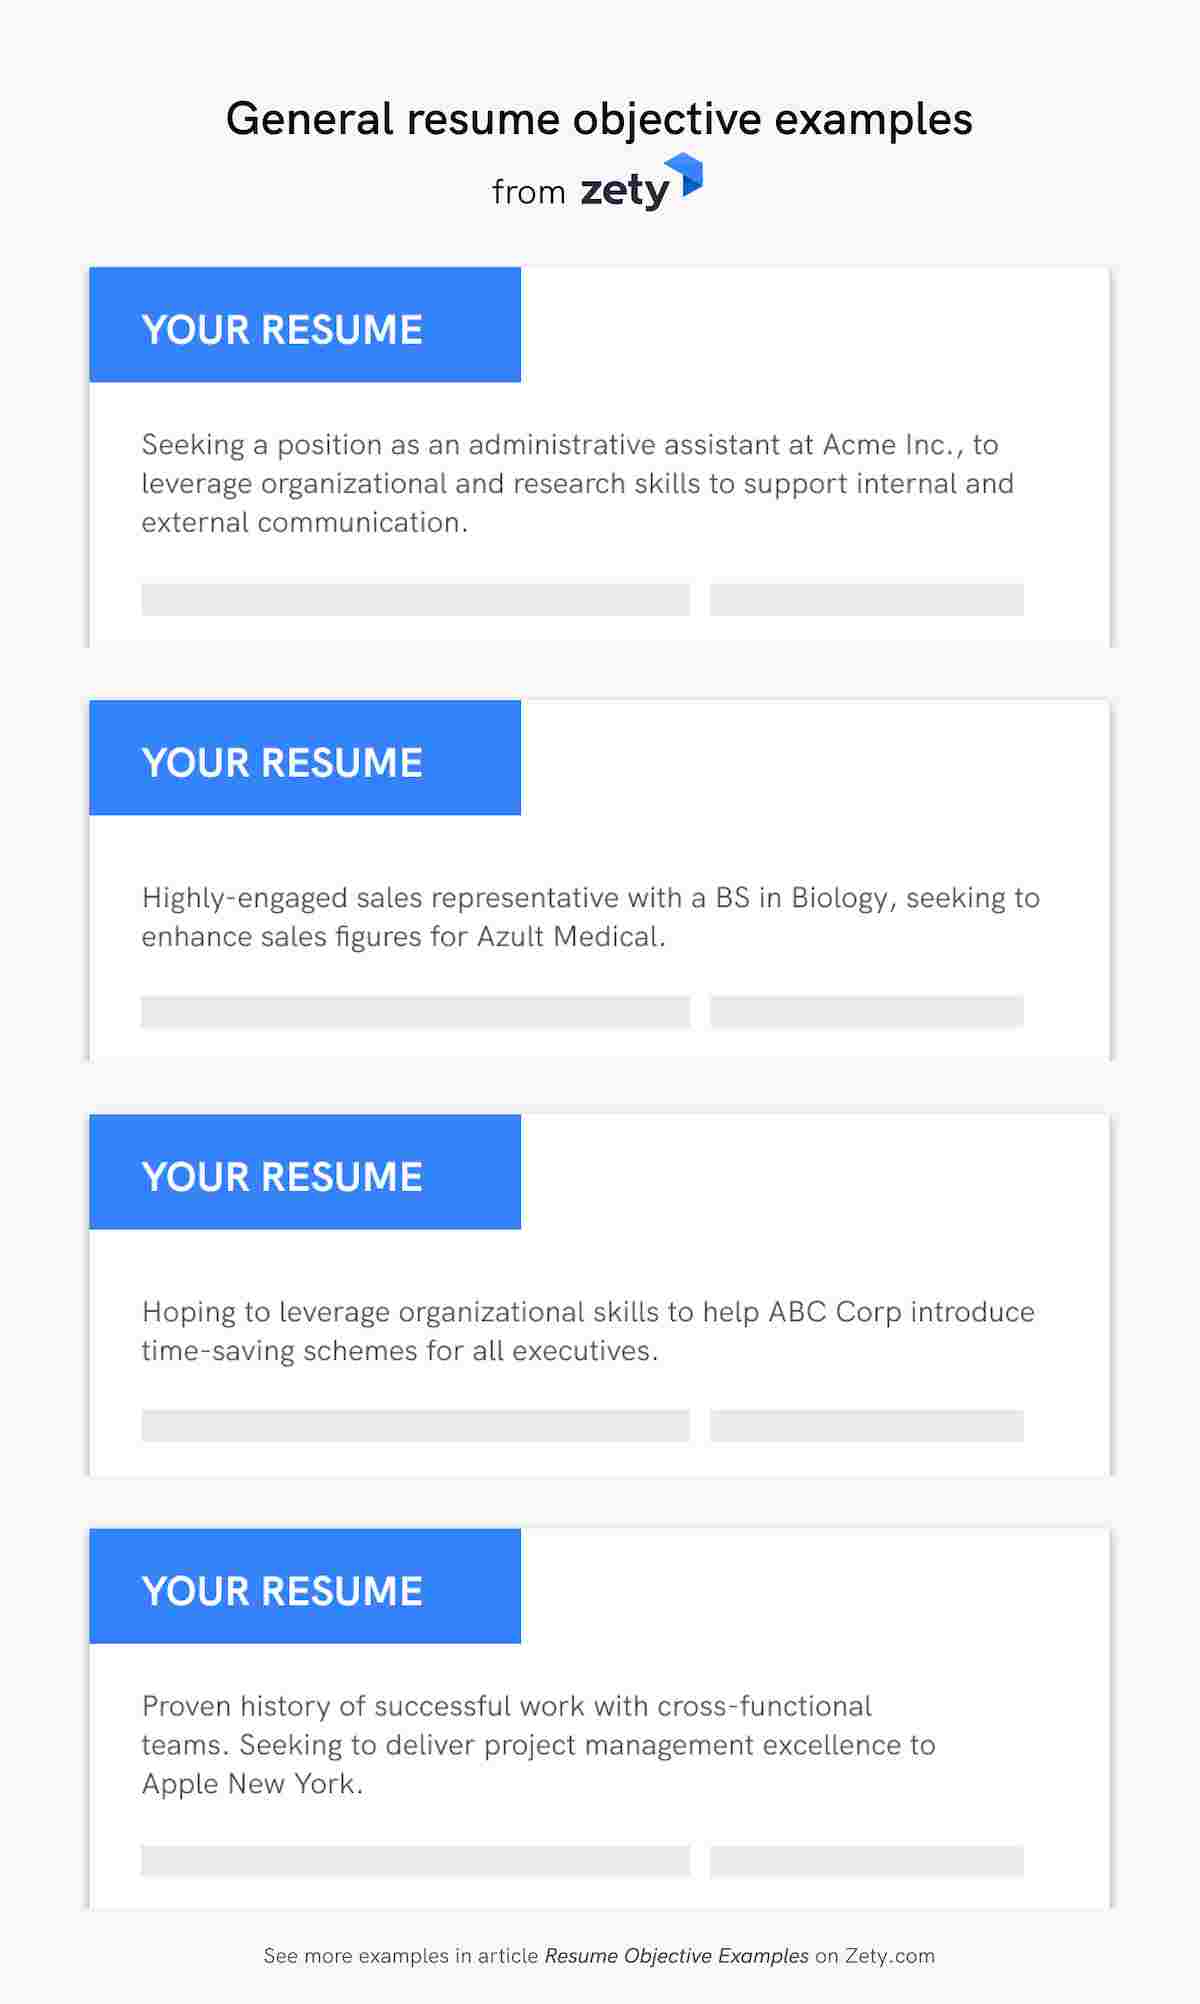 17+ Resume Objective Examples: Career Objectives for All Jobs